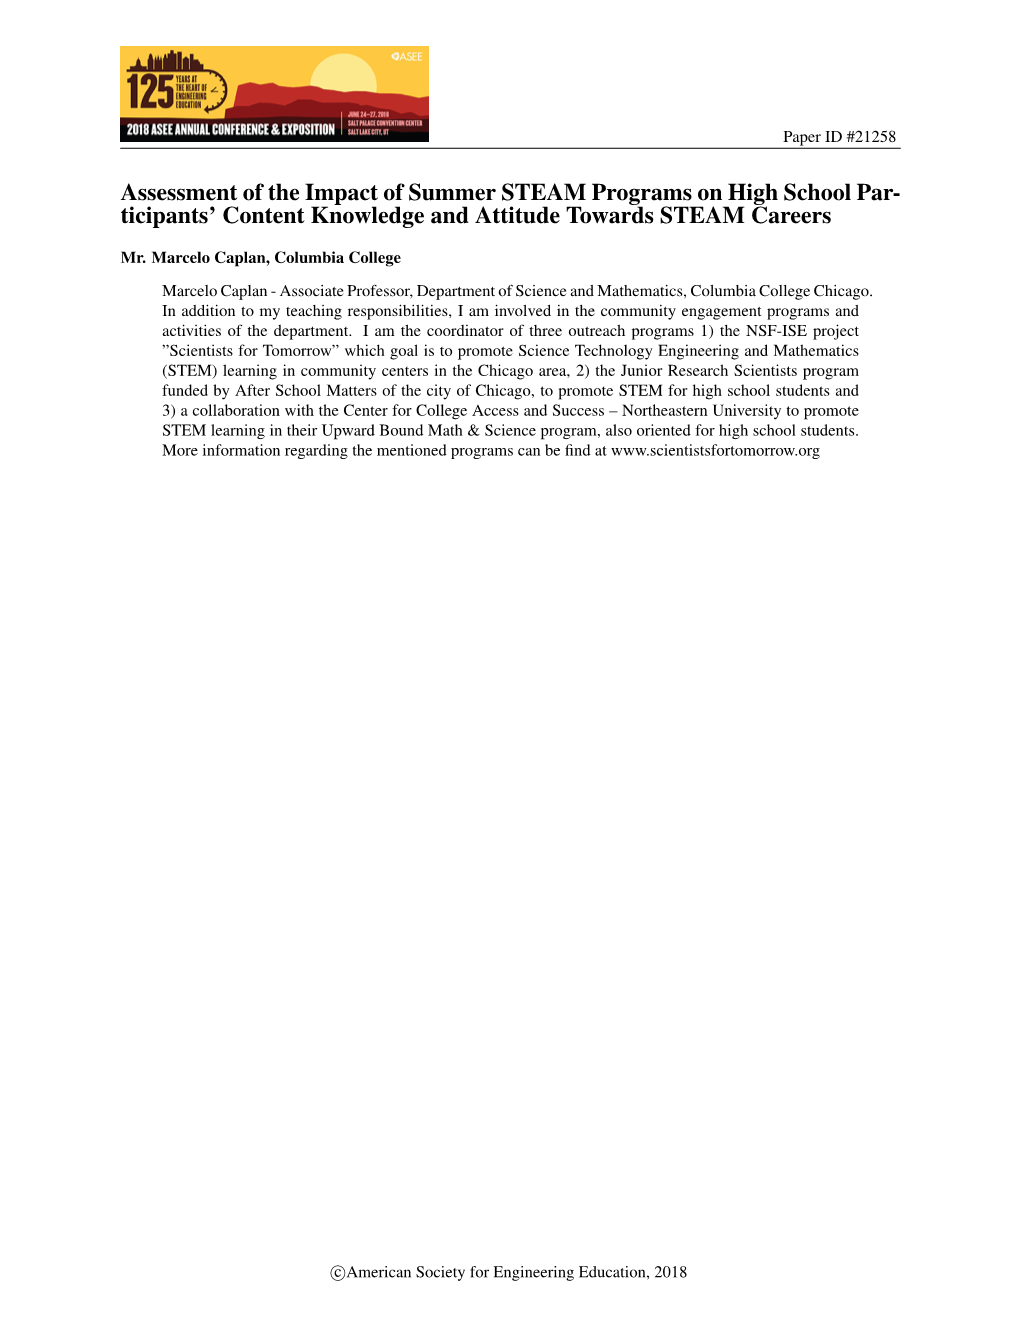 Assessment of the Impact of Summer STEAM Programs on High School Par- Ticipants’ Content Knowledge and Attitude Towards STEAM Careers